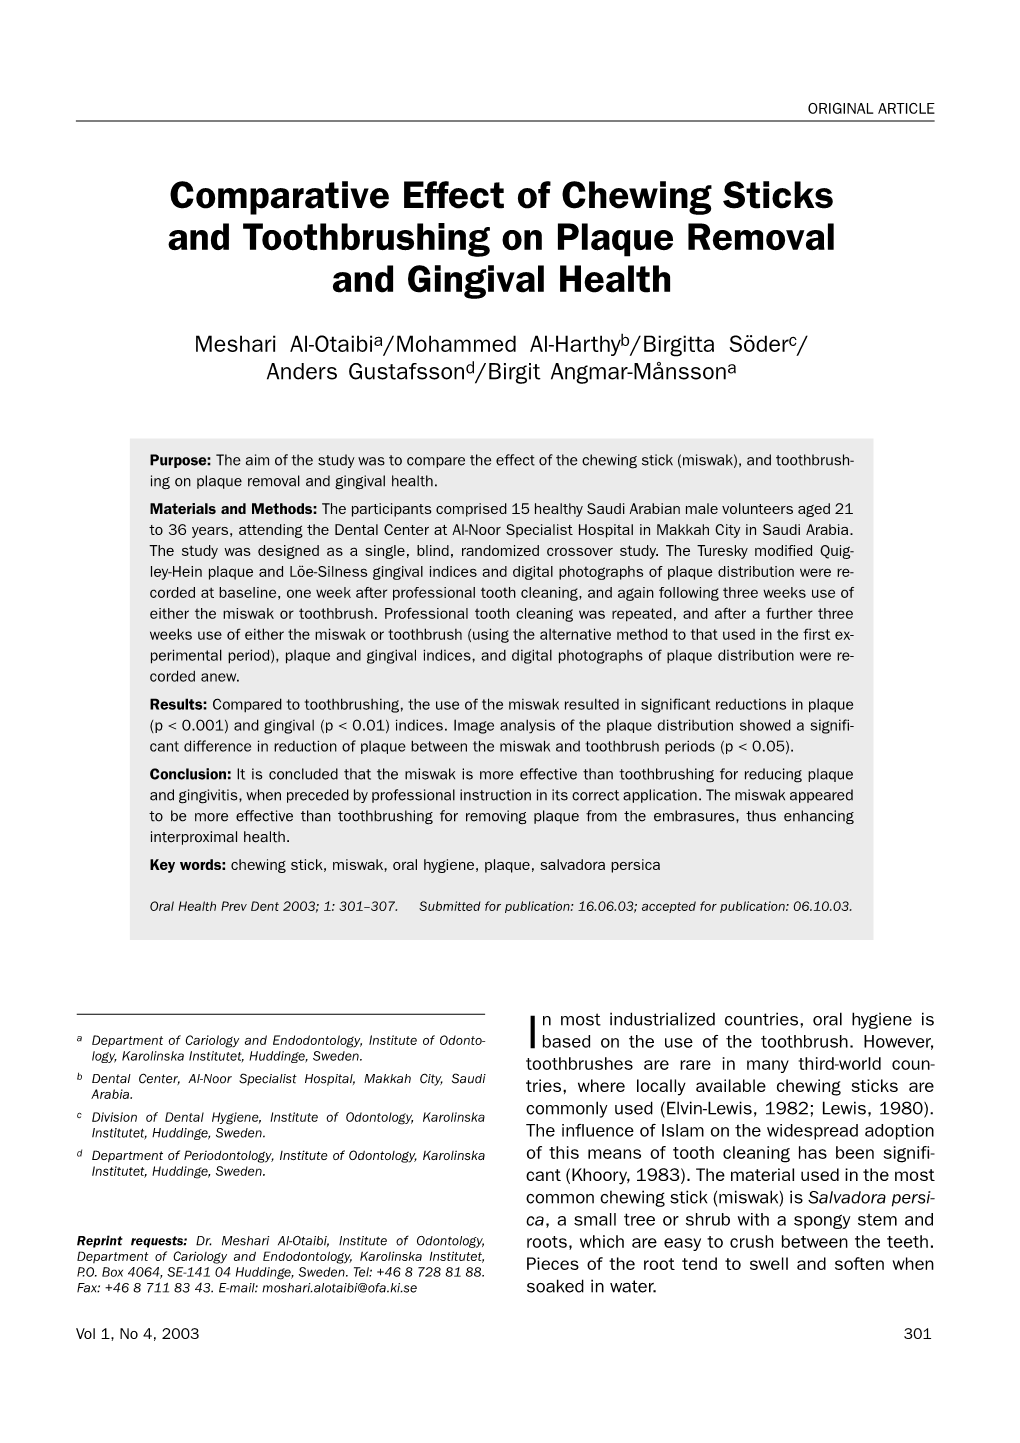 Comparative Effect of Chewing Sticks and Toothbrushing on Plaque Removal and Gingival Health